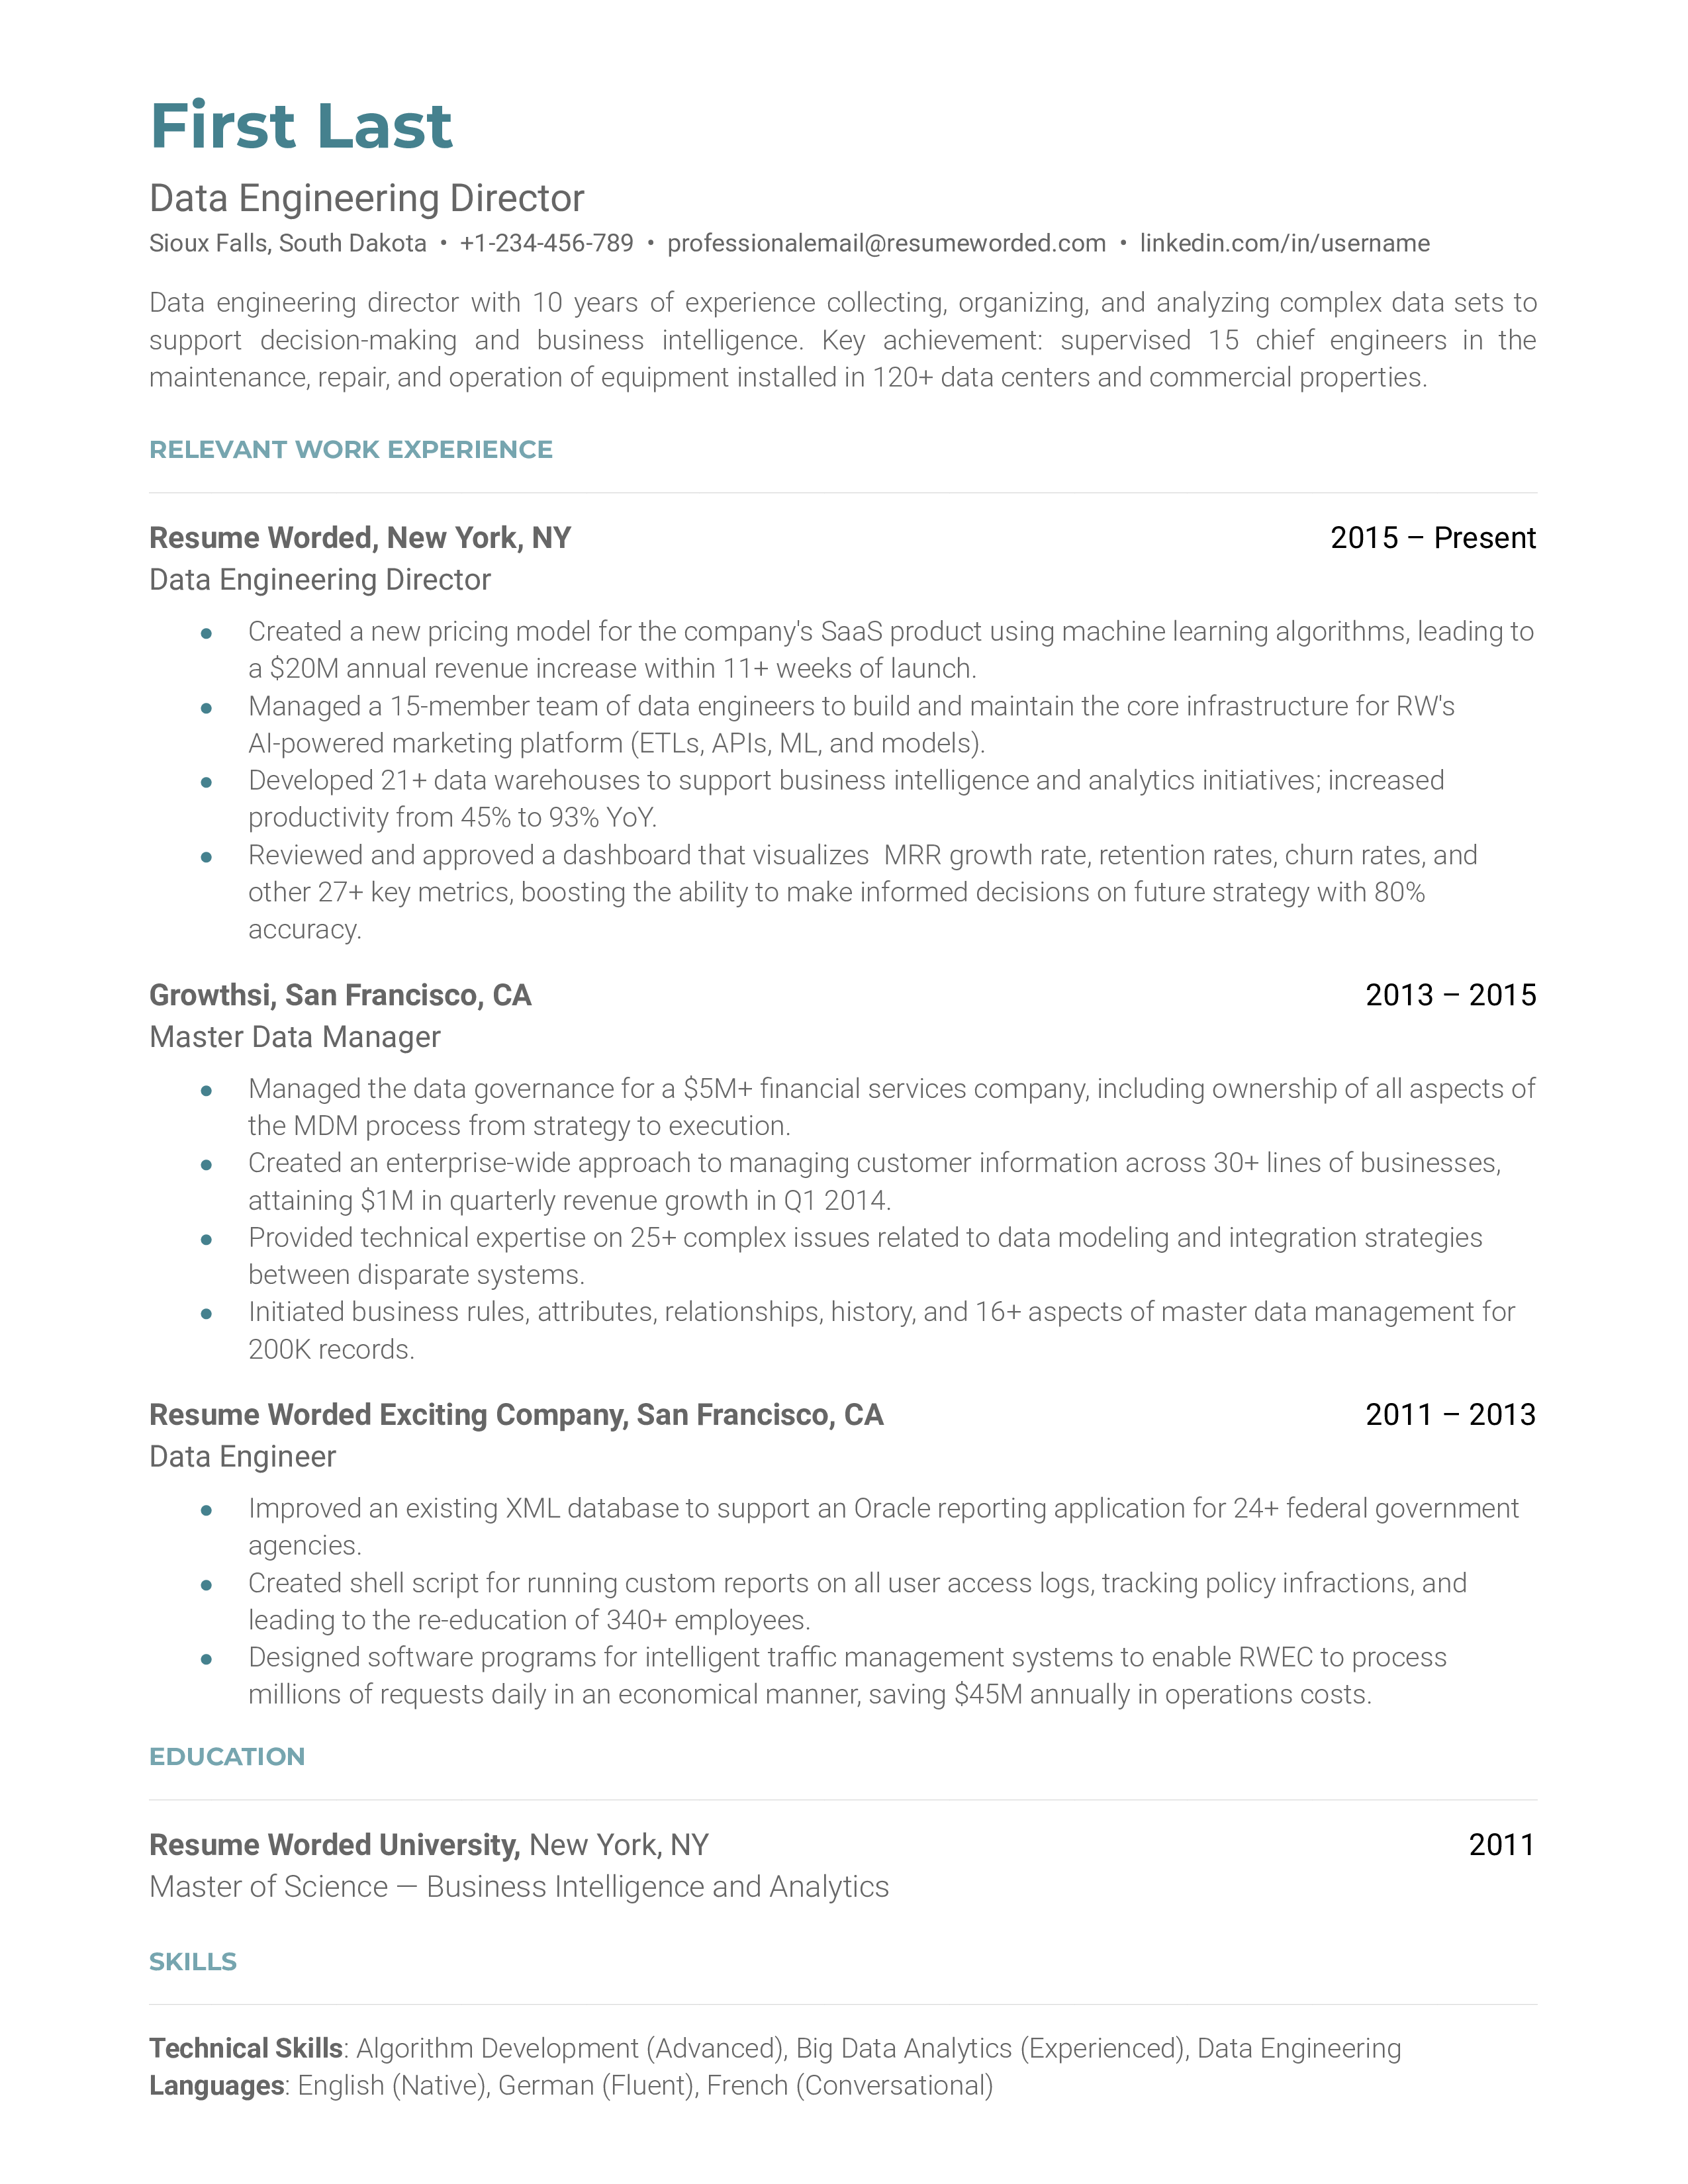 A well-structured CV for a Data Engineering Director.